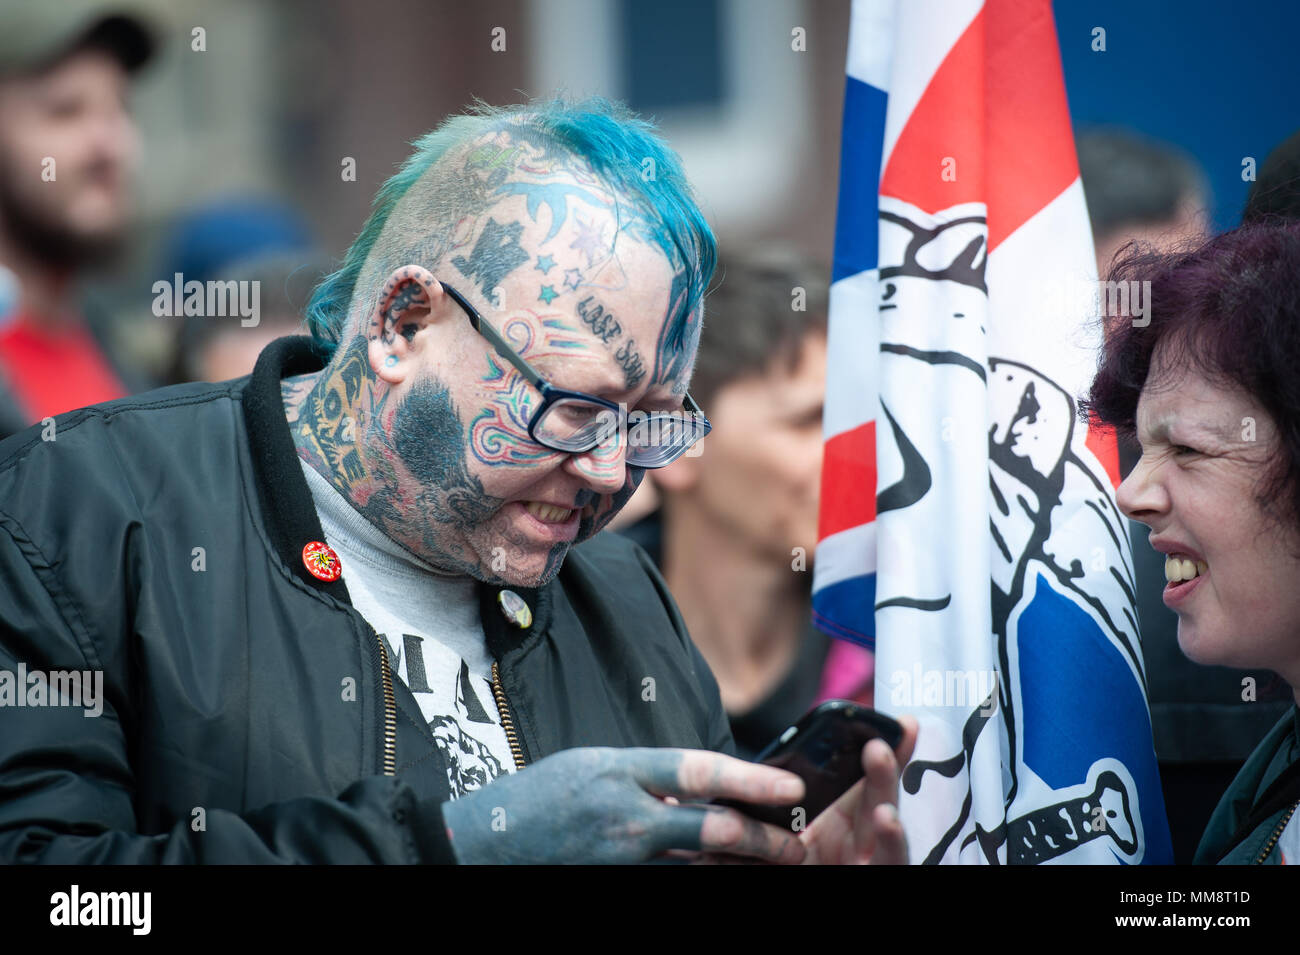 Walsall, West Midlands, UK. 7th April 2018. Pictured: A heavily tatooed man attends the EDL demonstration.  / Up to 60 English Defence League supporte Stock Photo